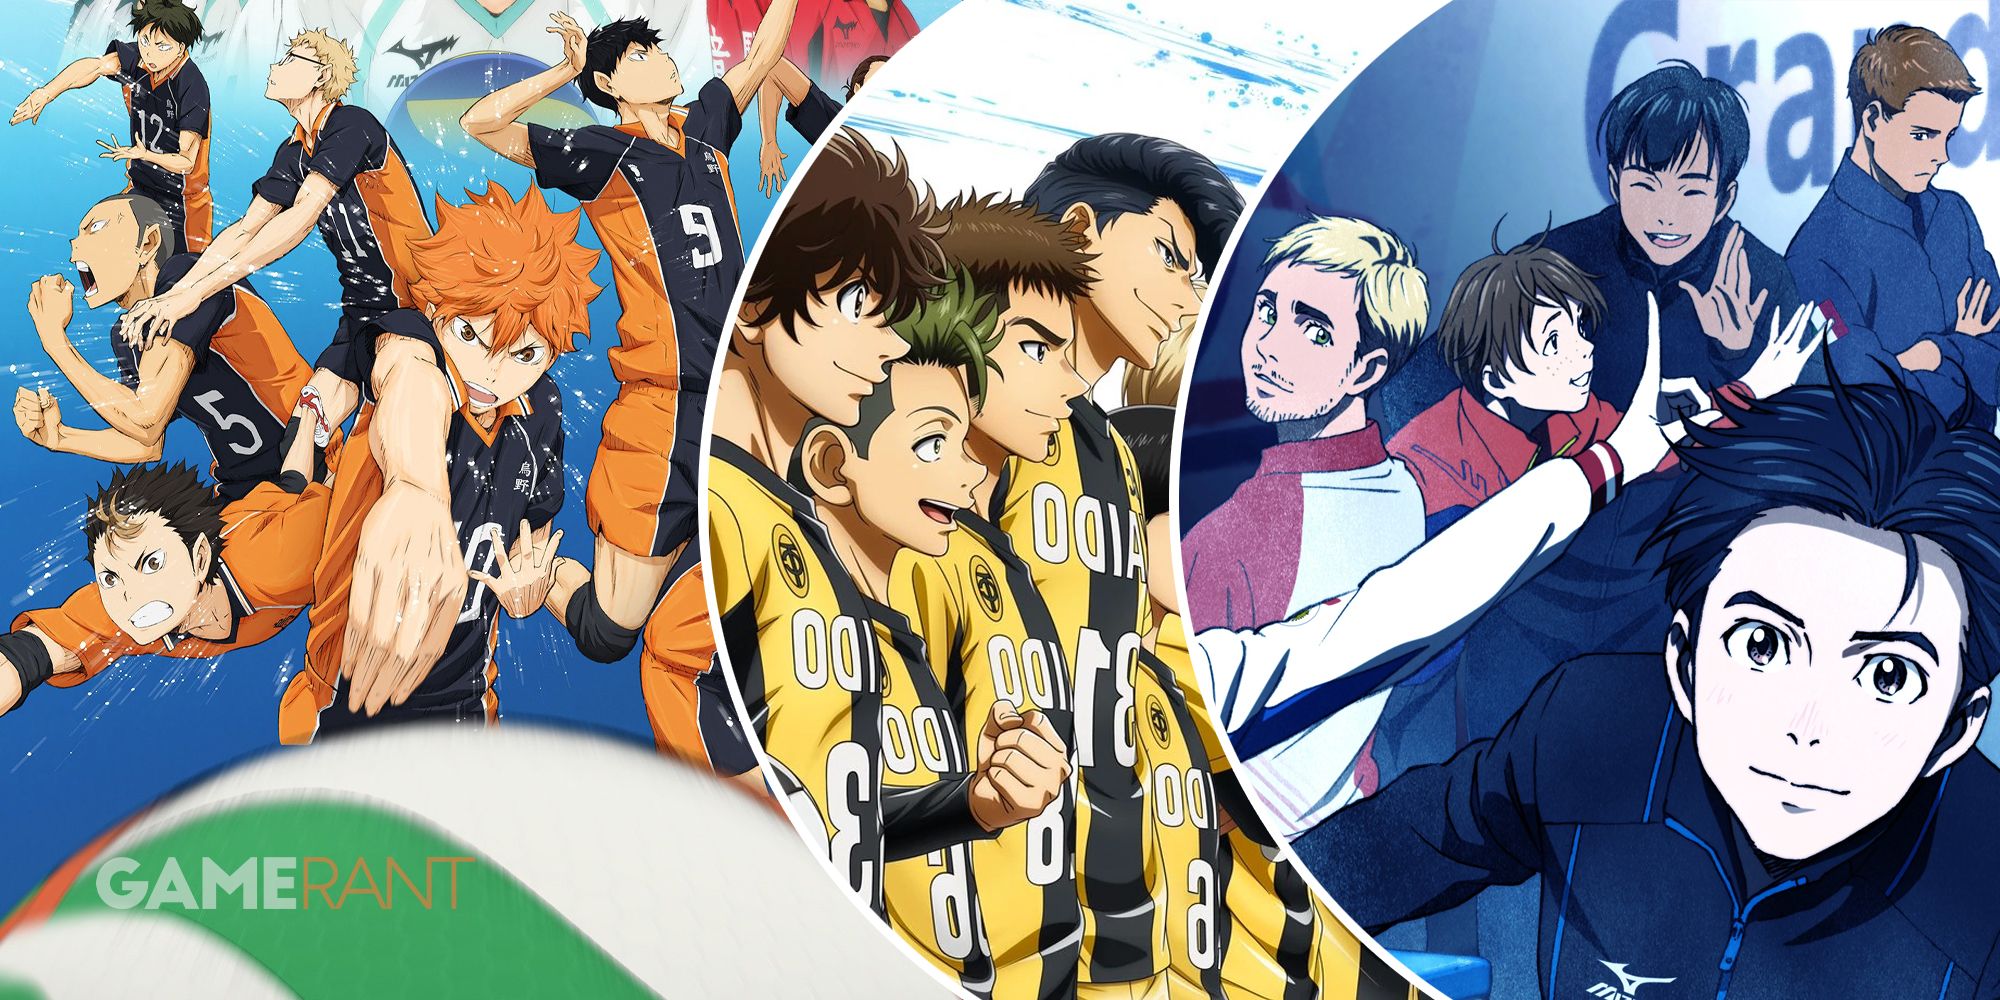 Haikyu!! characters in action on left, Aoashi soccer players posing in middle, Yuri!! On Ice cast of characters on right